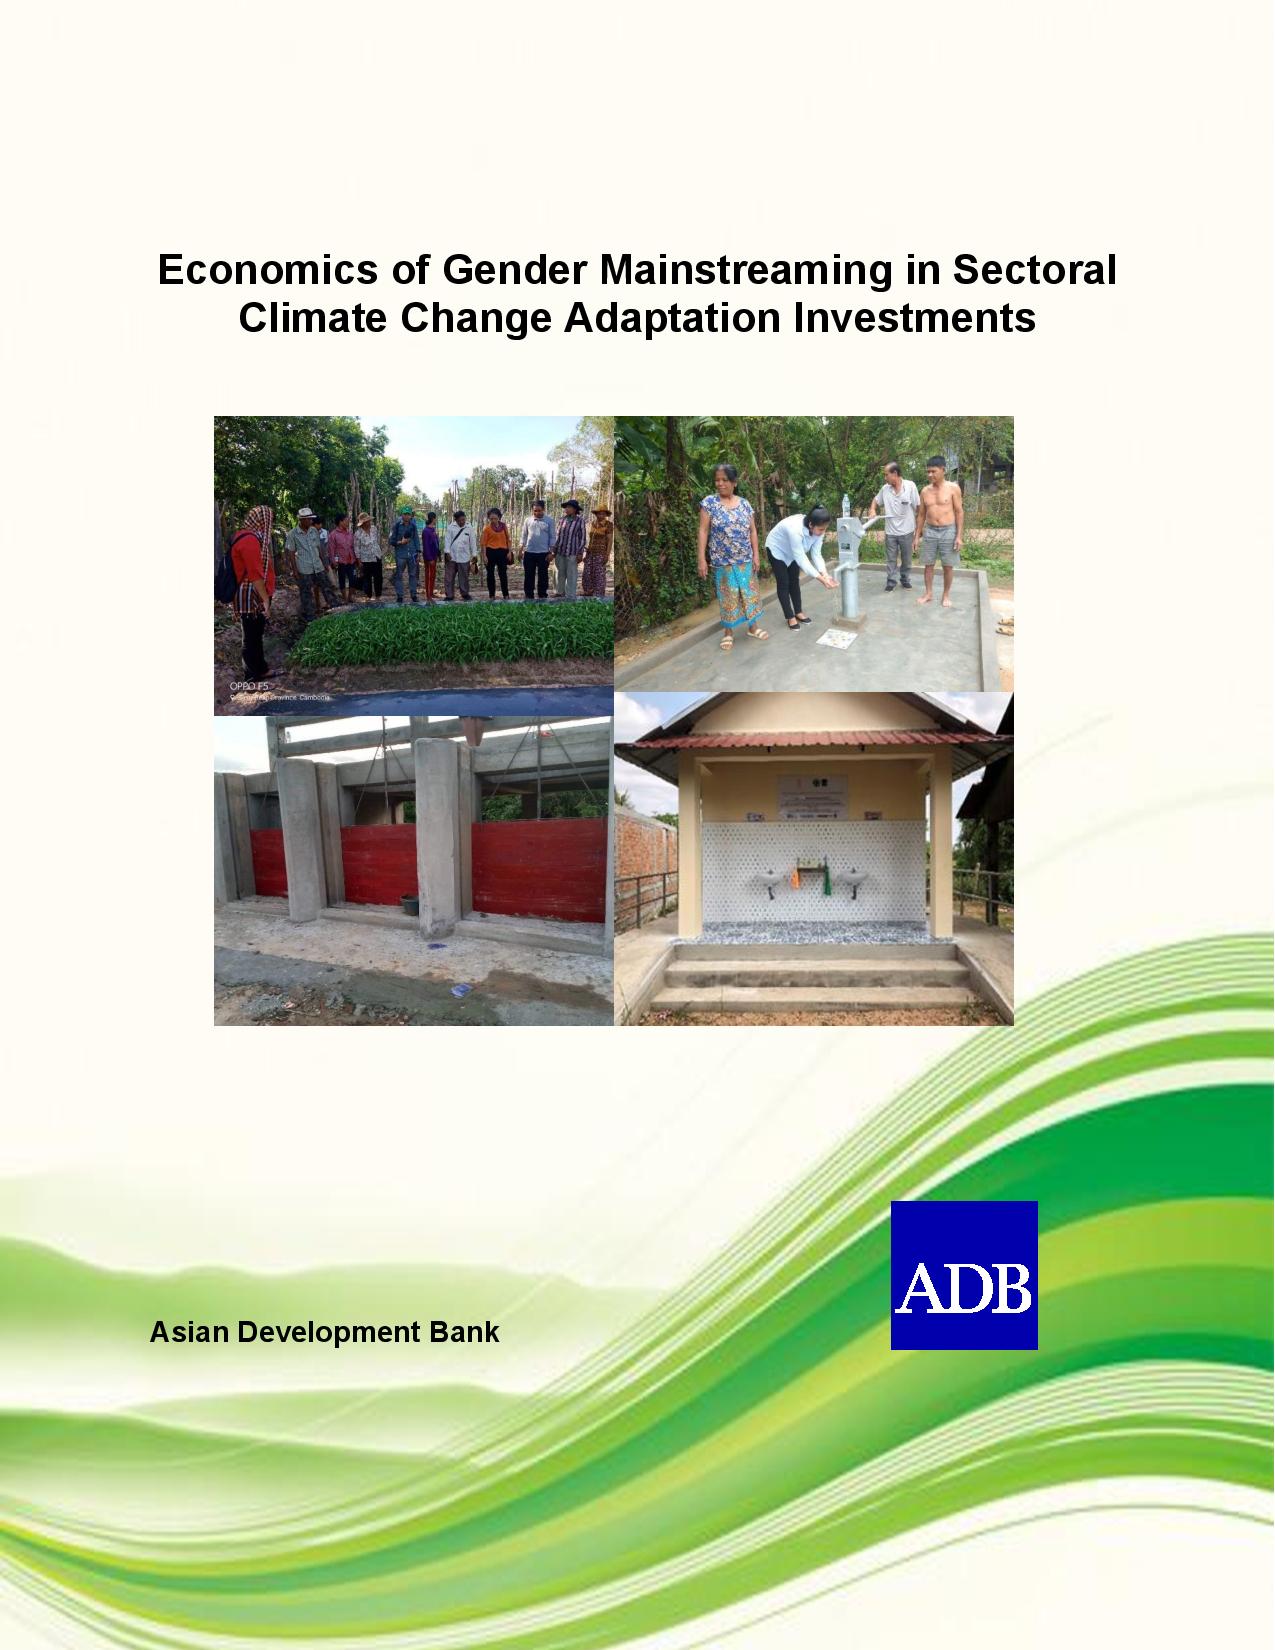 Economics of Gender Mainstreaming in Sectoral Climate Change Adaptation Investments